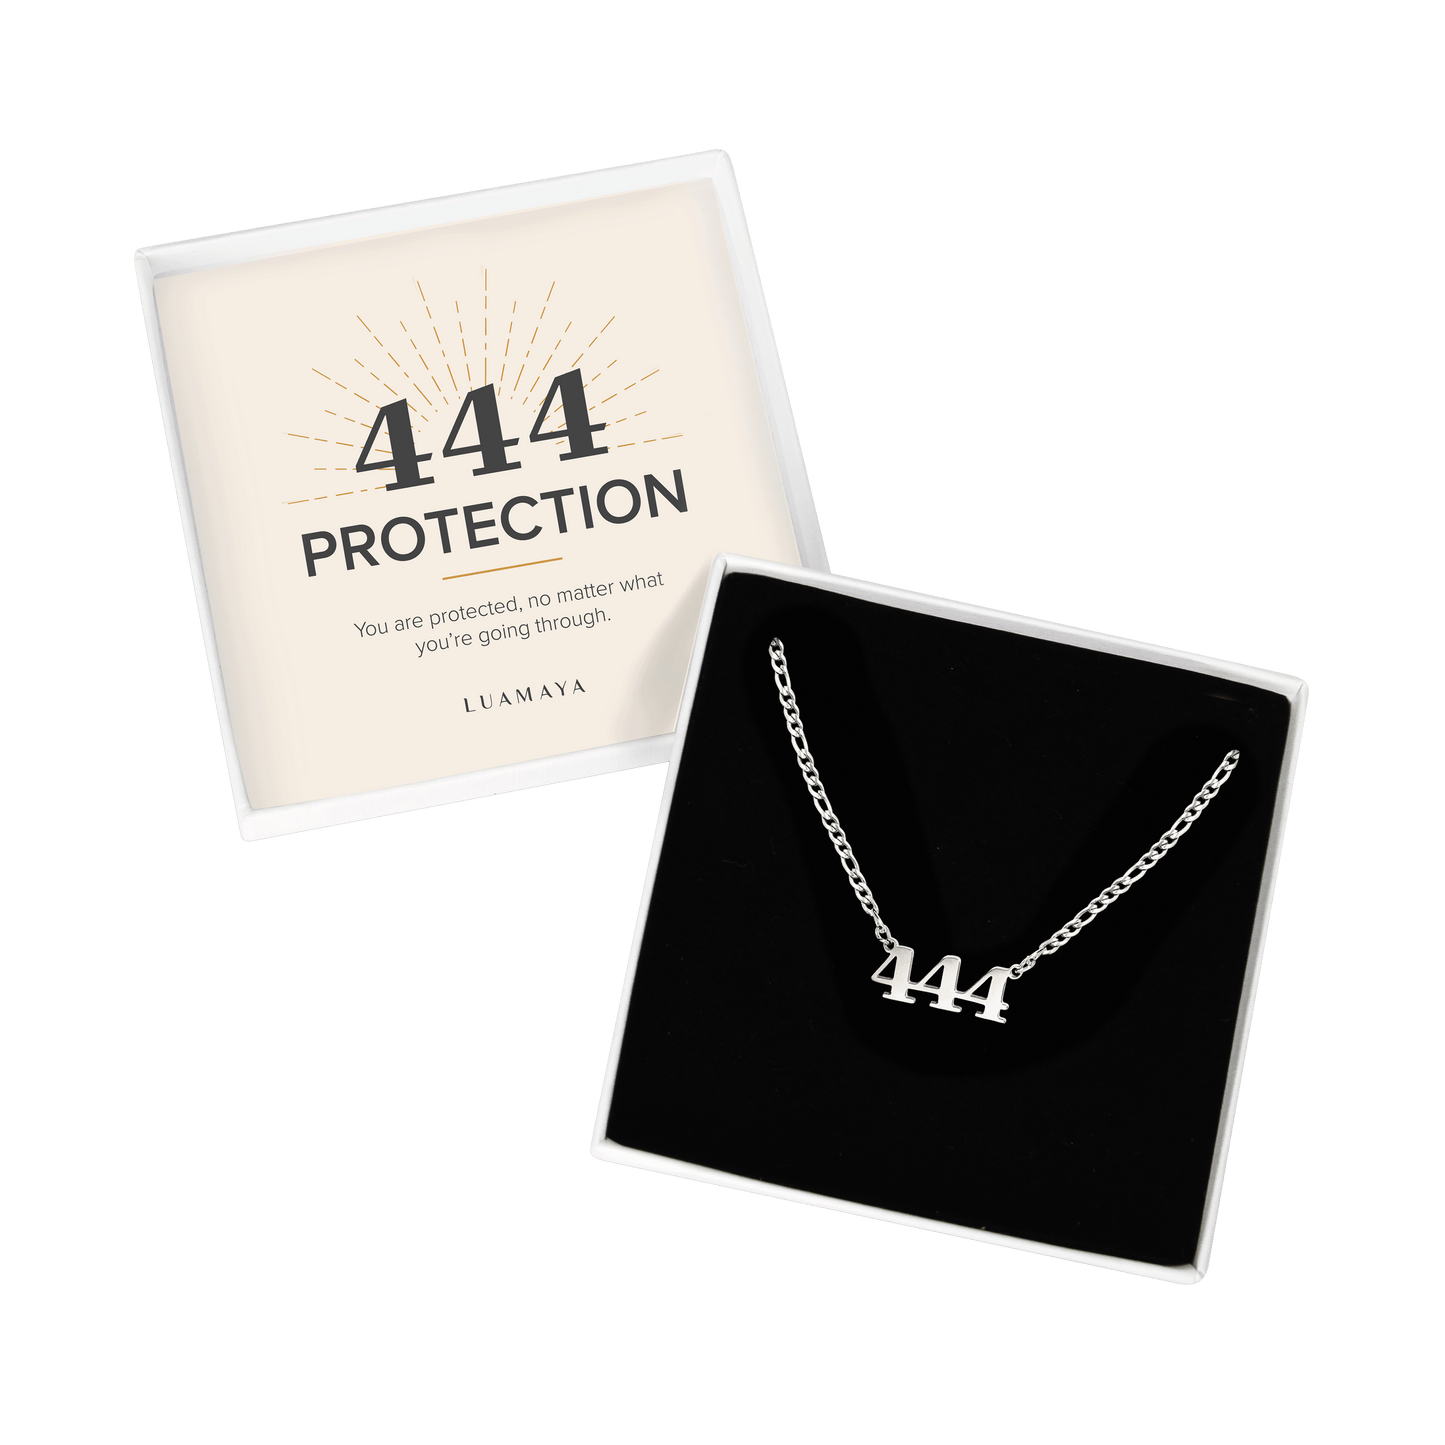 Angel Number 444 Necklace Silver